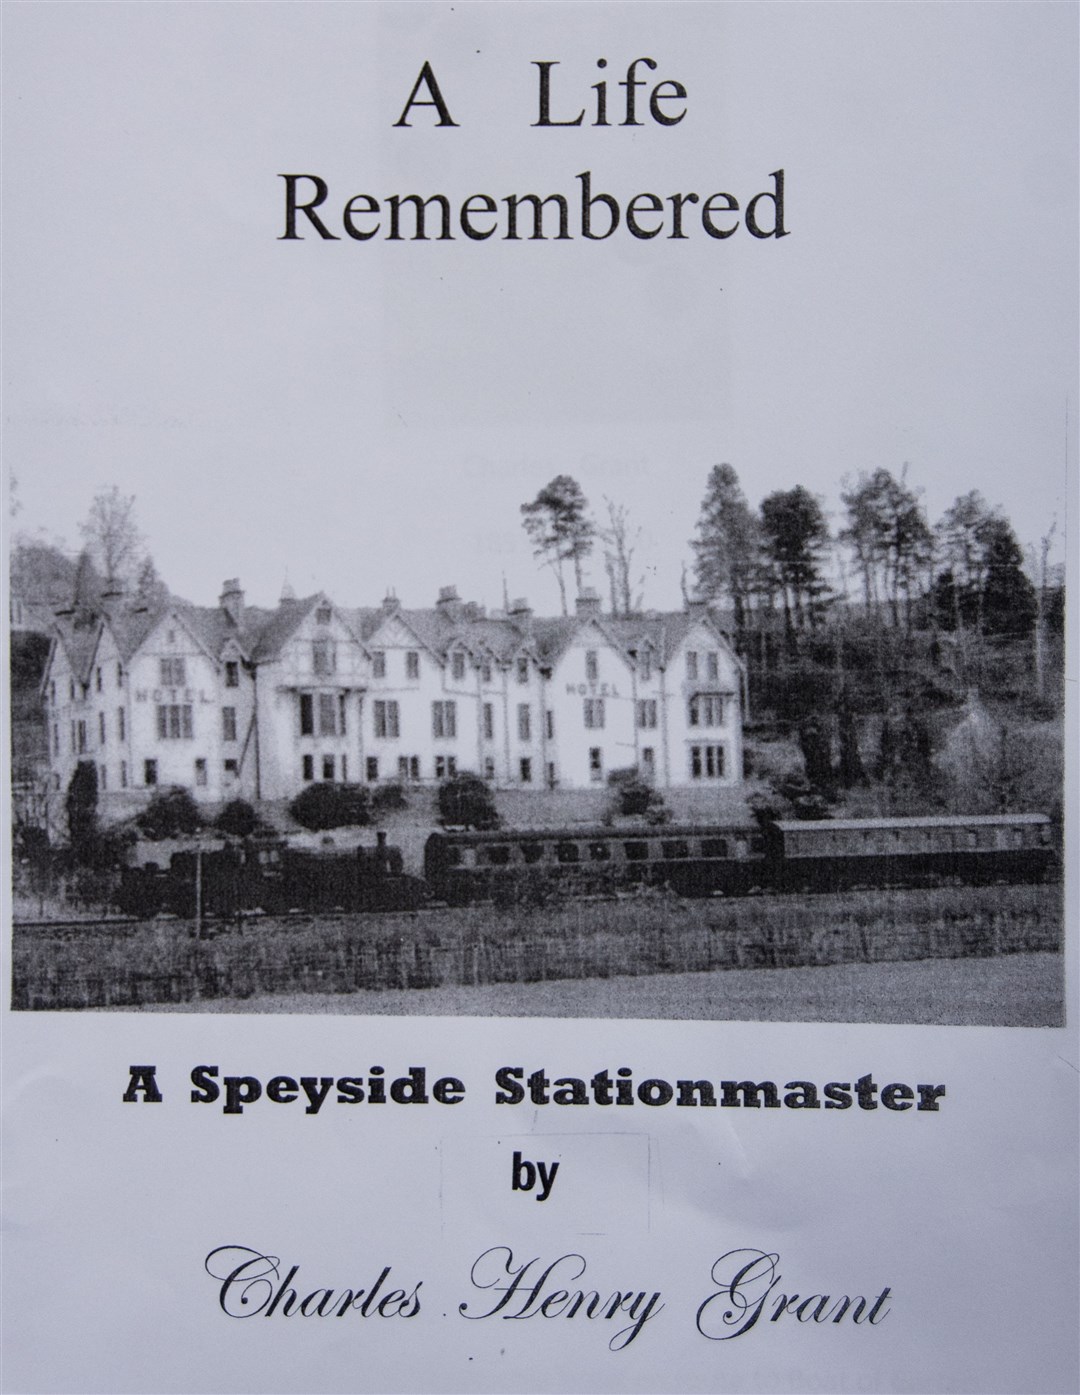 A Life Remembered, A Speyside Stationmaster by Charles Henry Grant is a moving tribute.